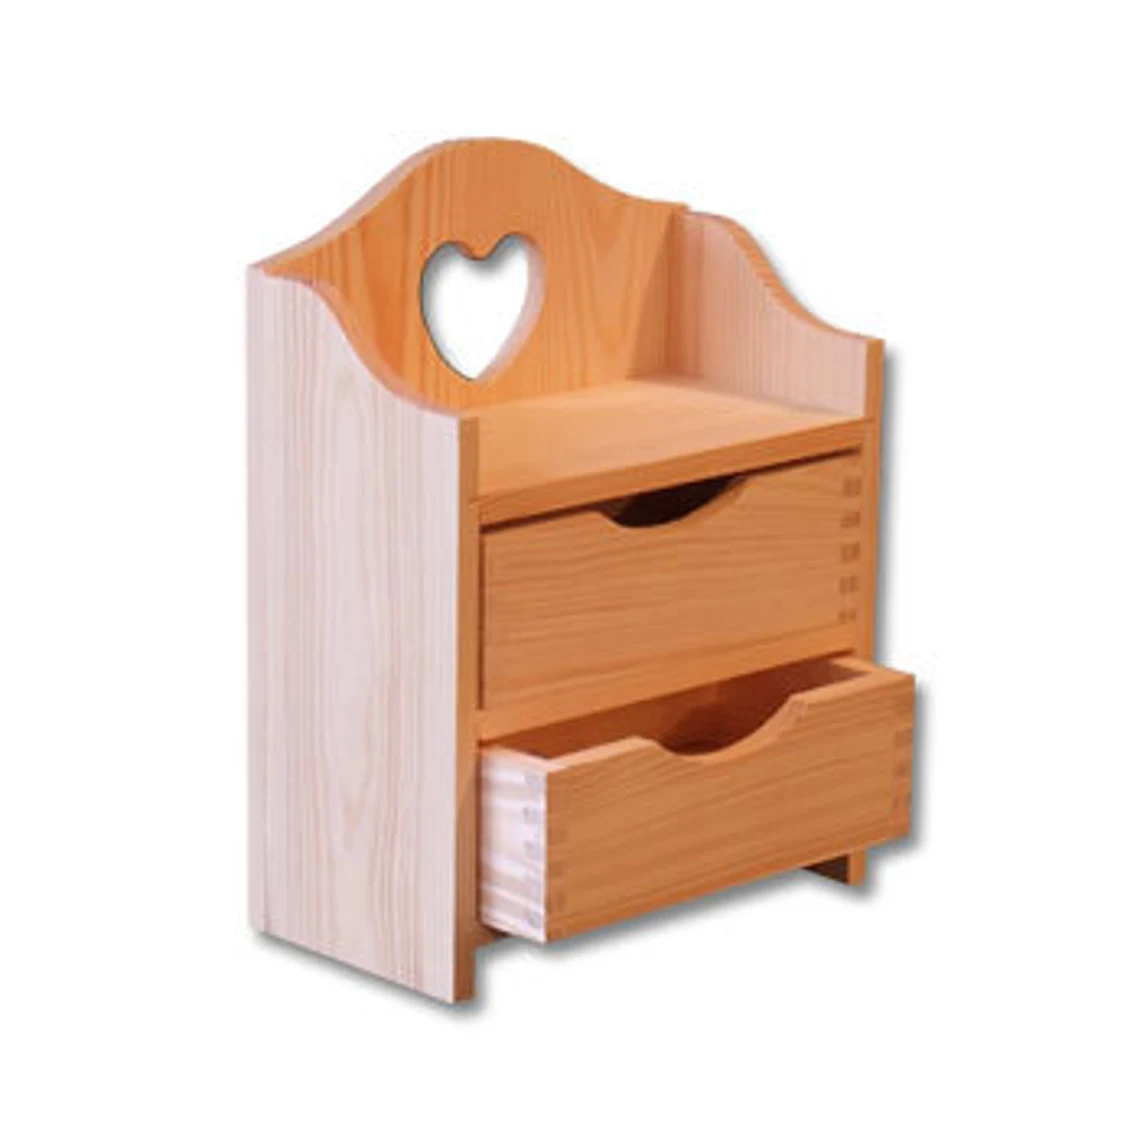 Unpainted Wooden Jewellery Case With Drawers